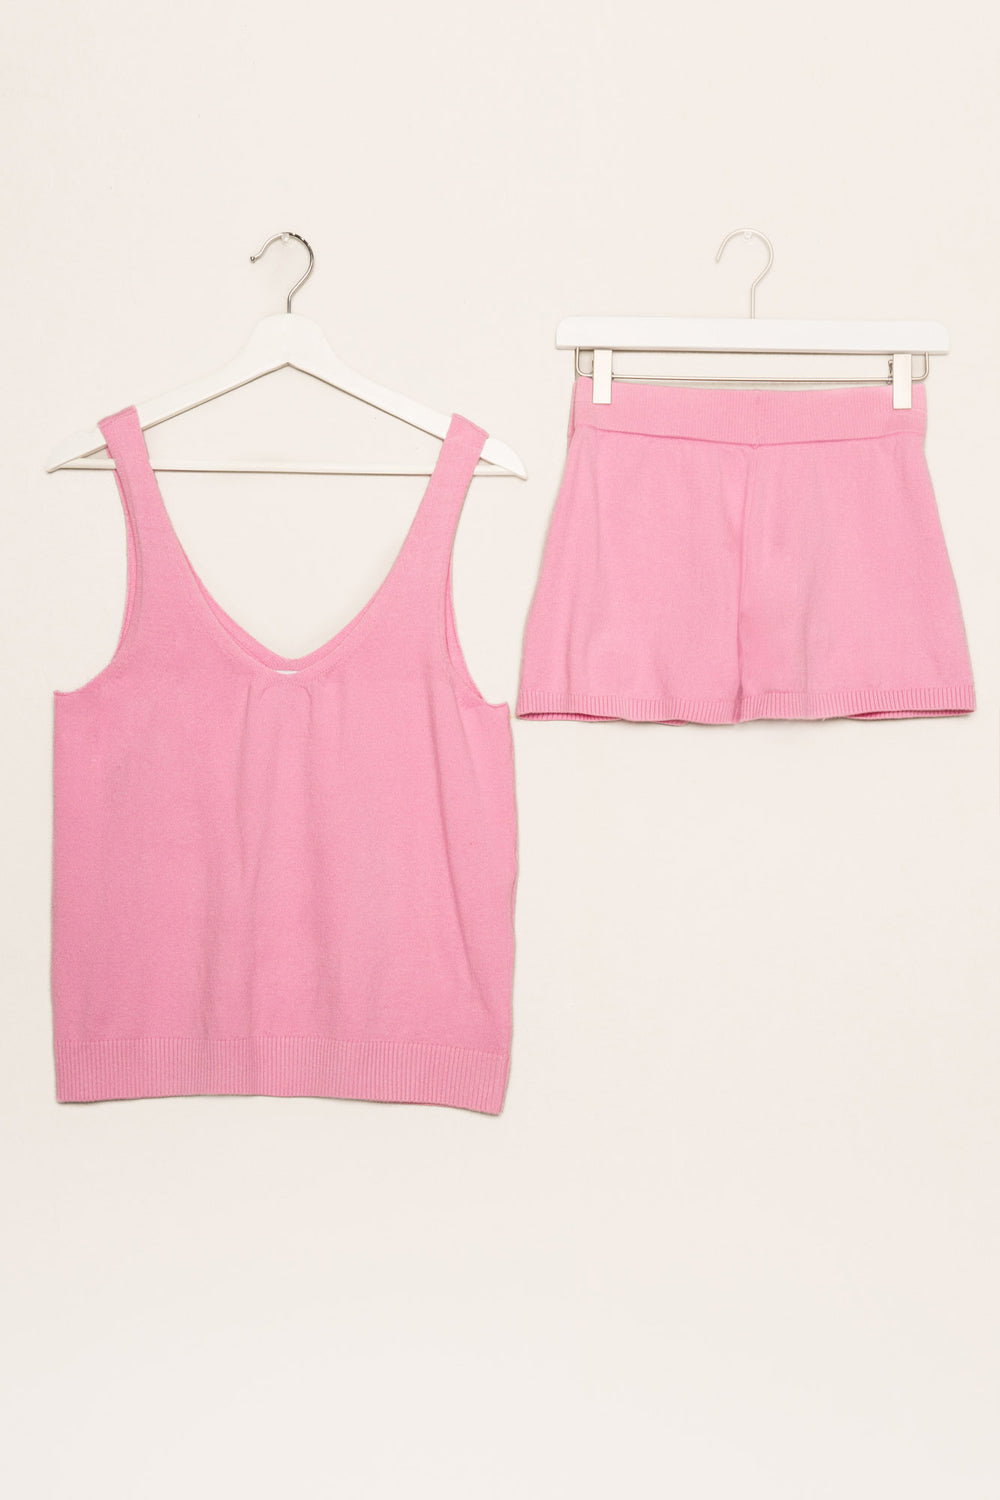 Matching pink short set in light sweater knit with wide ribbed waist. Top has double V-neck. (7196191555684)